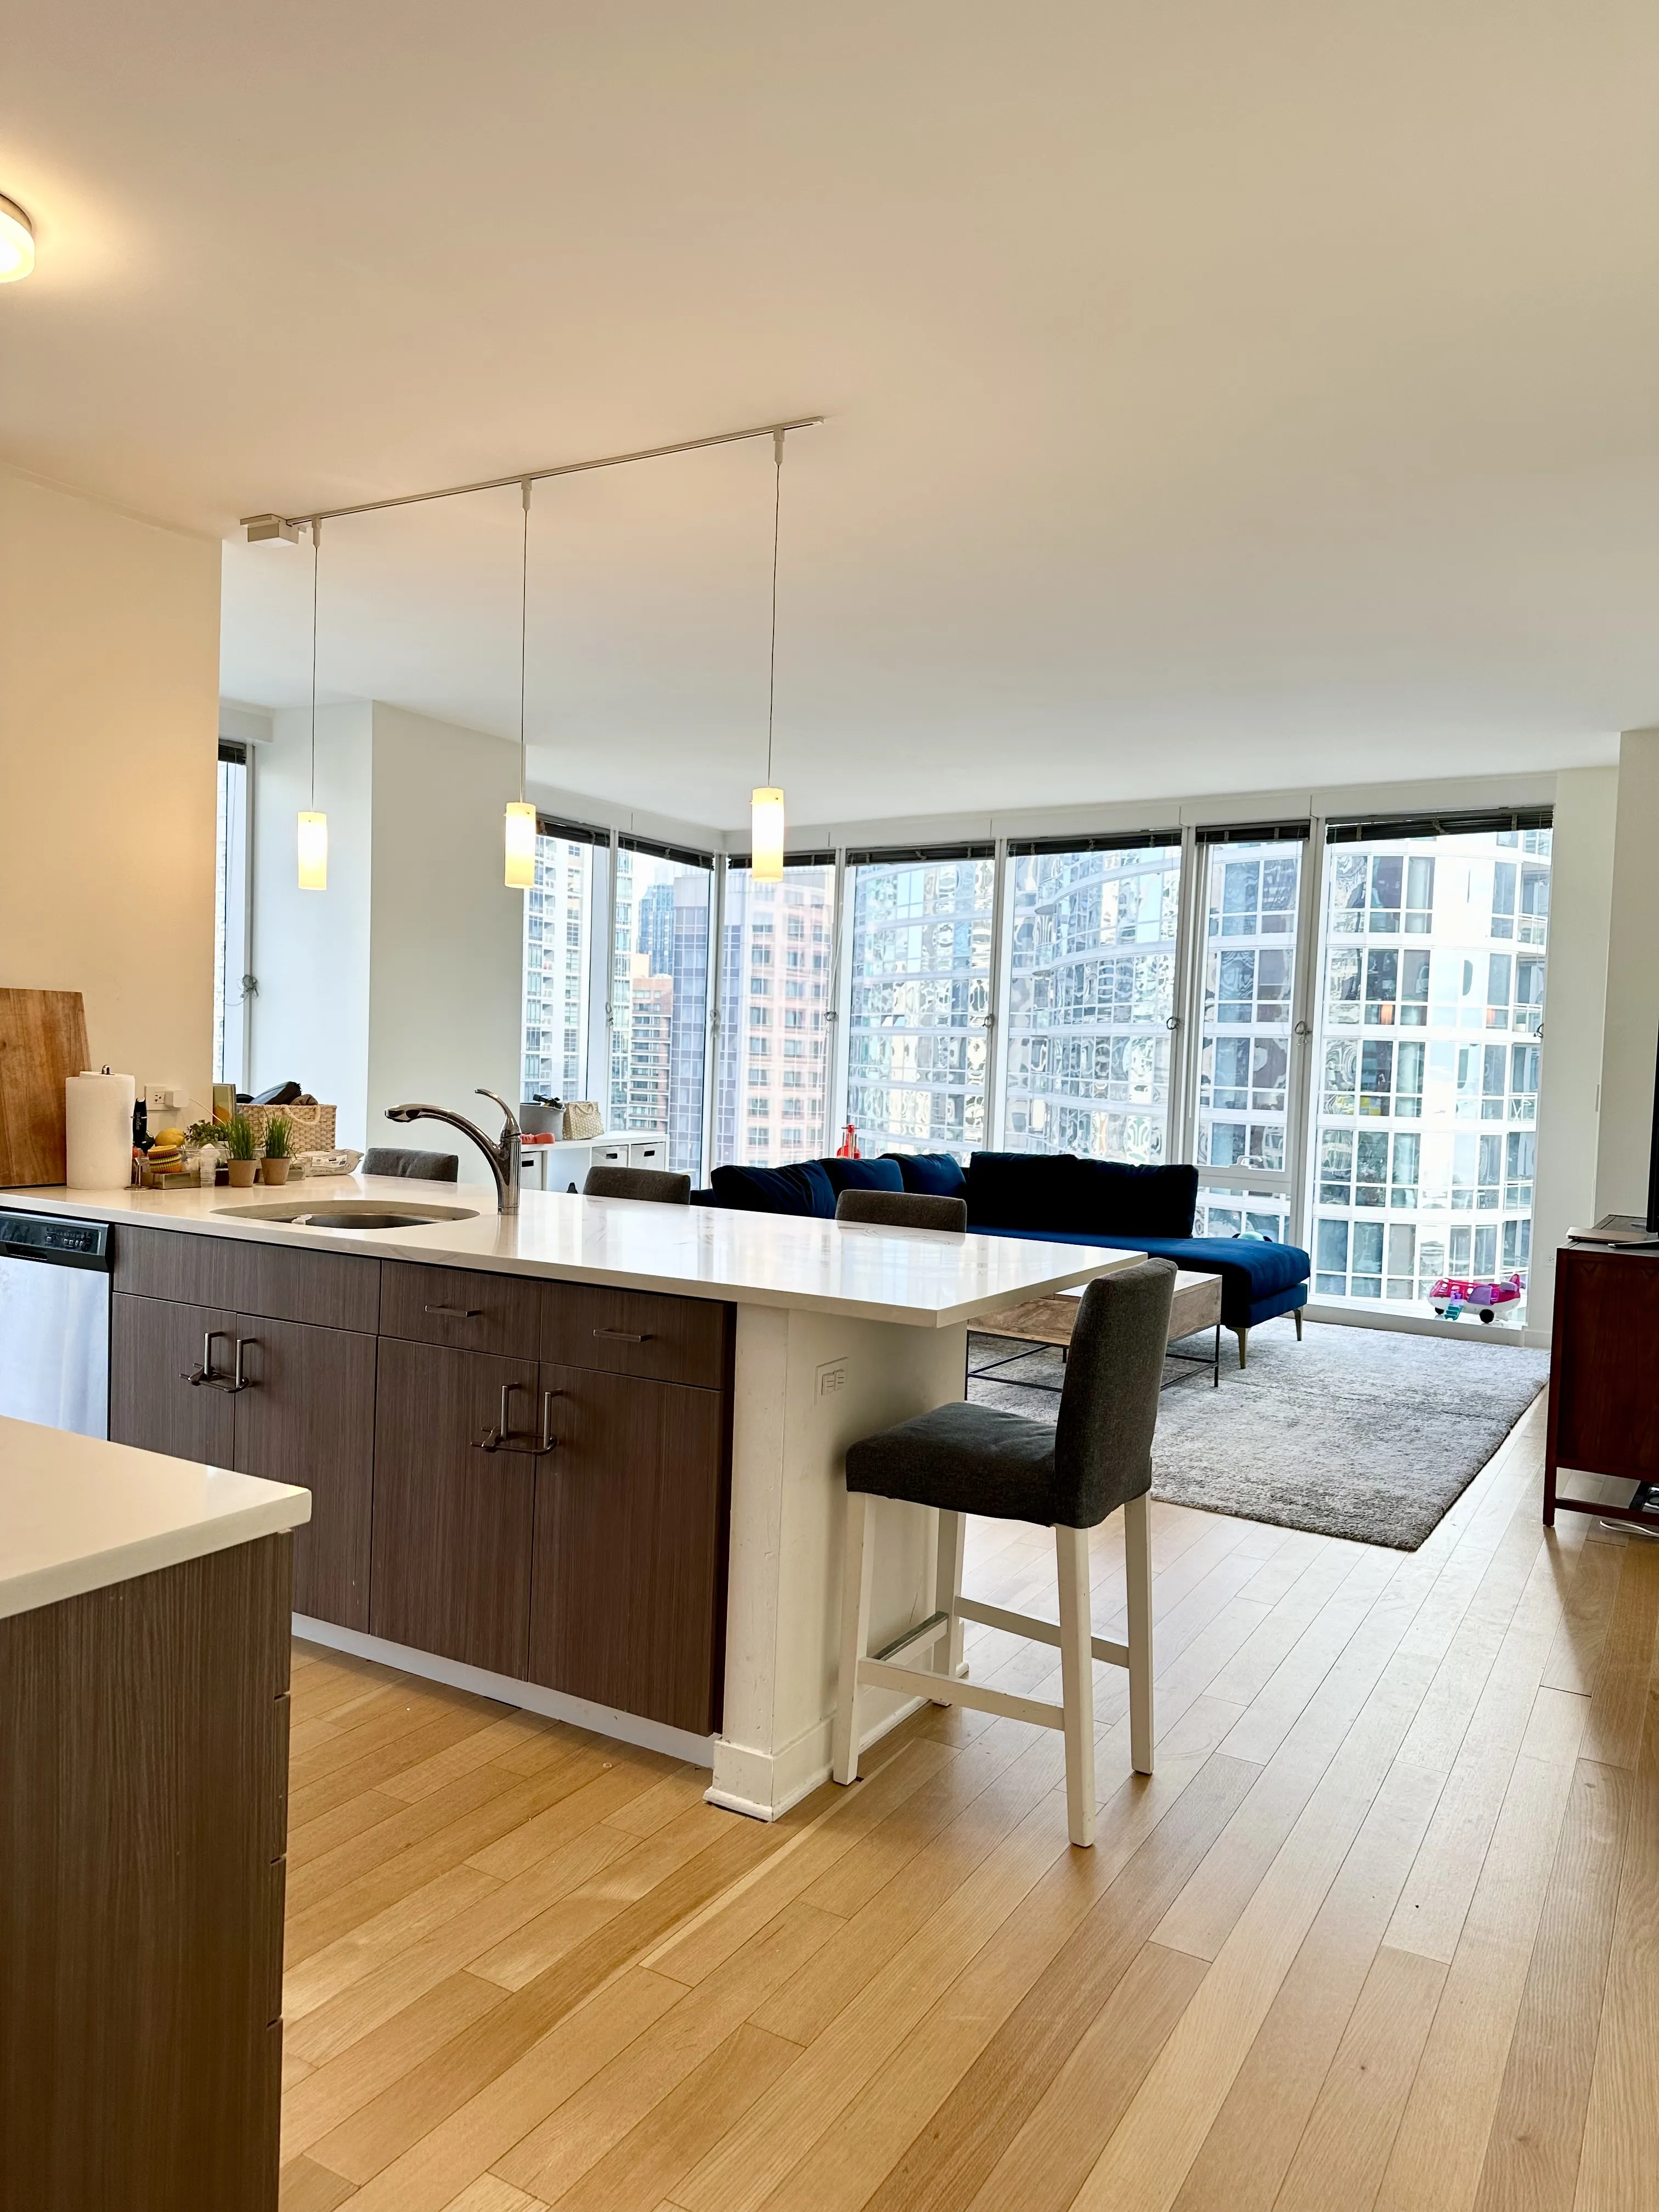 340 East North Water Street 60611-North Water Apartments-unit#1810-Chicago-IL